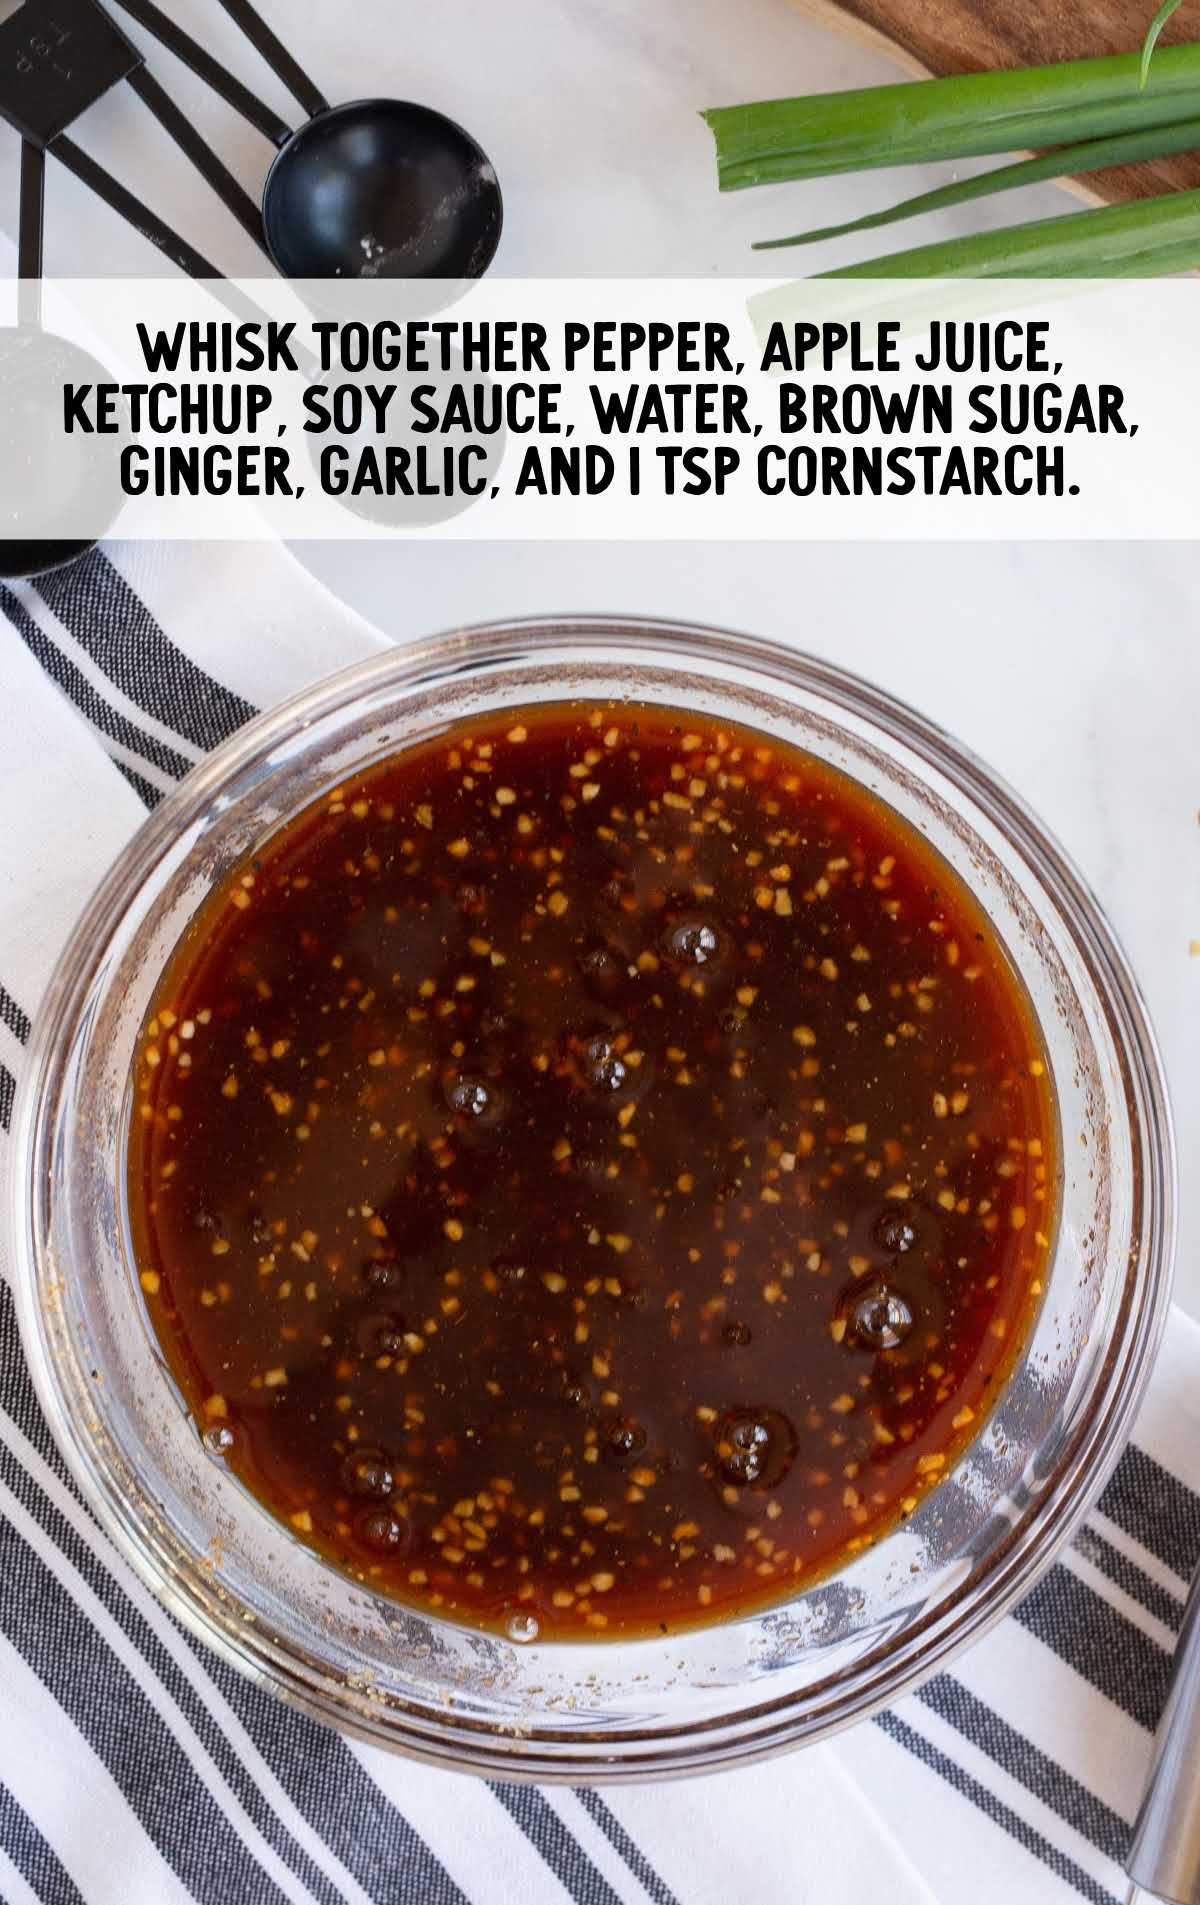 pepper, apple juice, ketchup, soy sauce, water, brown sugar, ginger, garlic and cornstarch whisked  together in a bowl